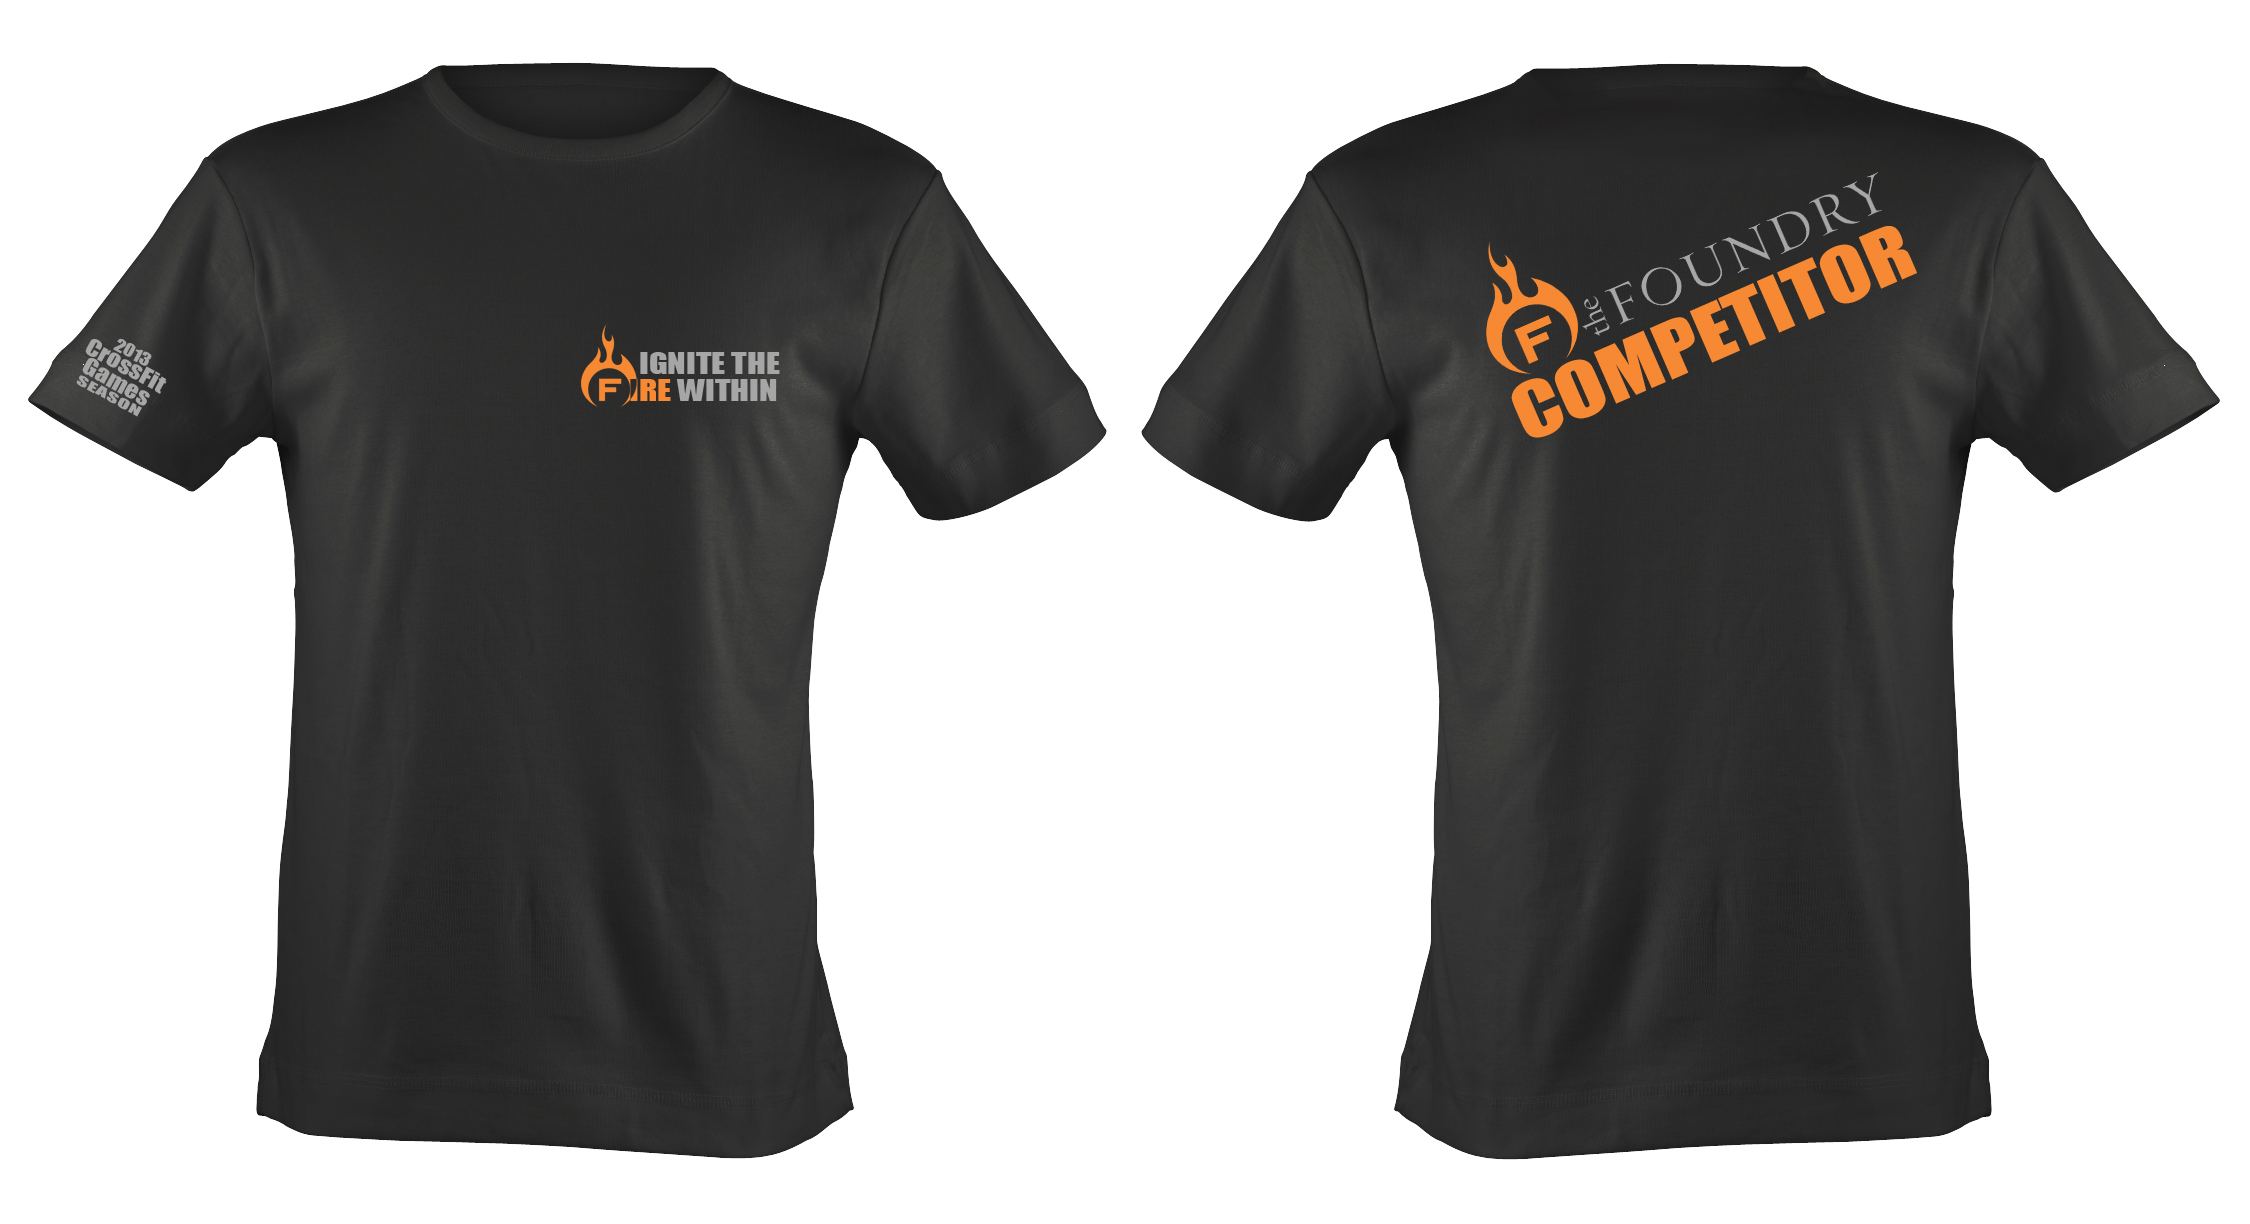 Foundry Competitor Tee (Mens)